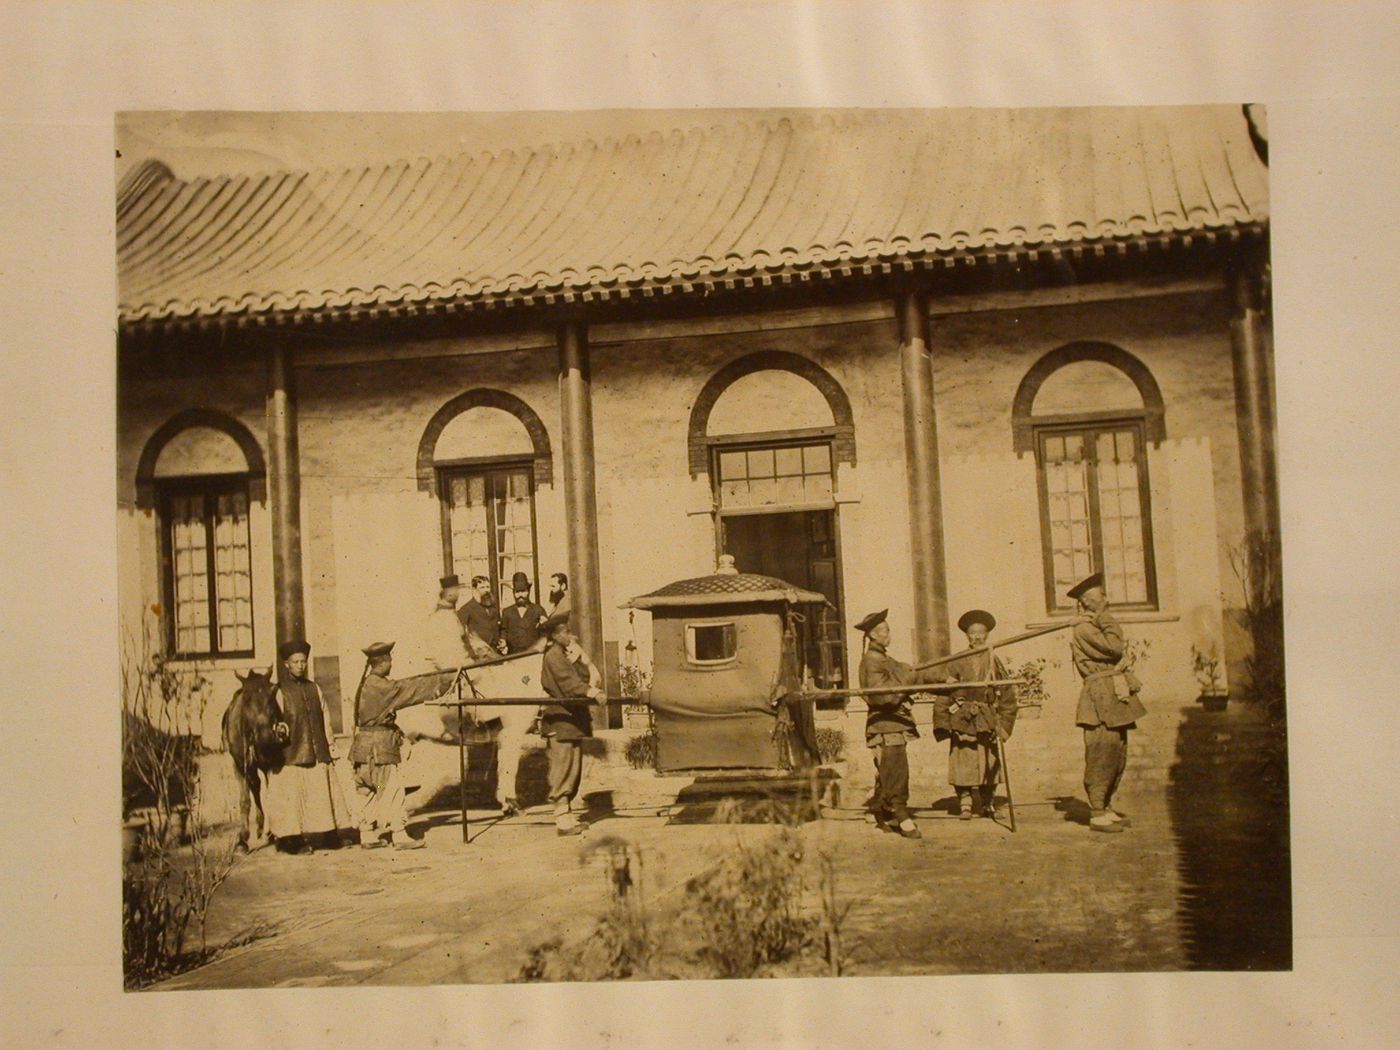 View of a litter with porters in front of a Chinese building with Westerners waiting, Peking (now Beijing) ?, China